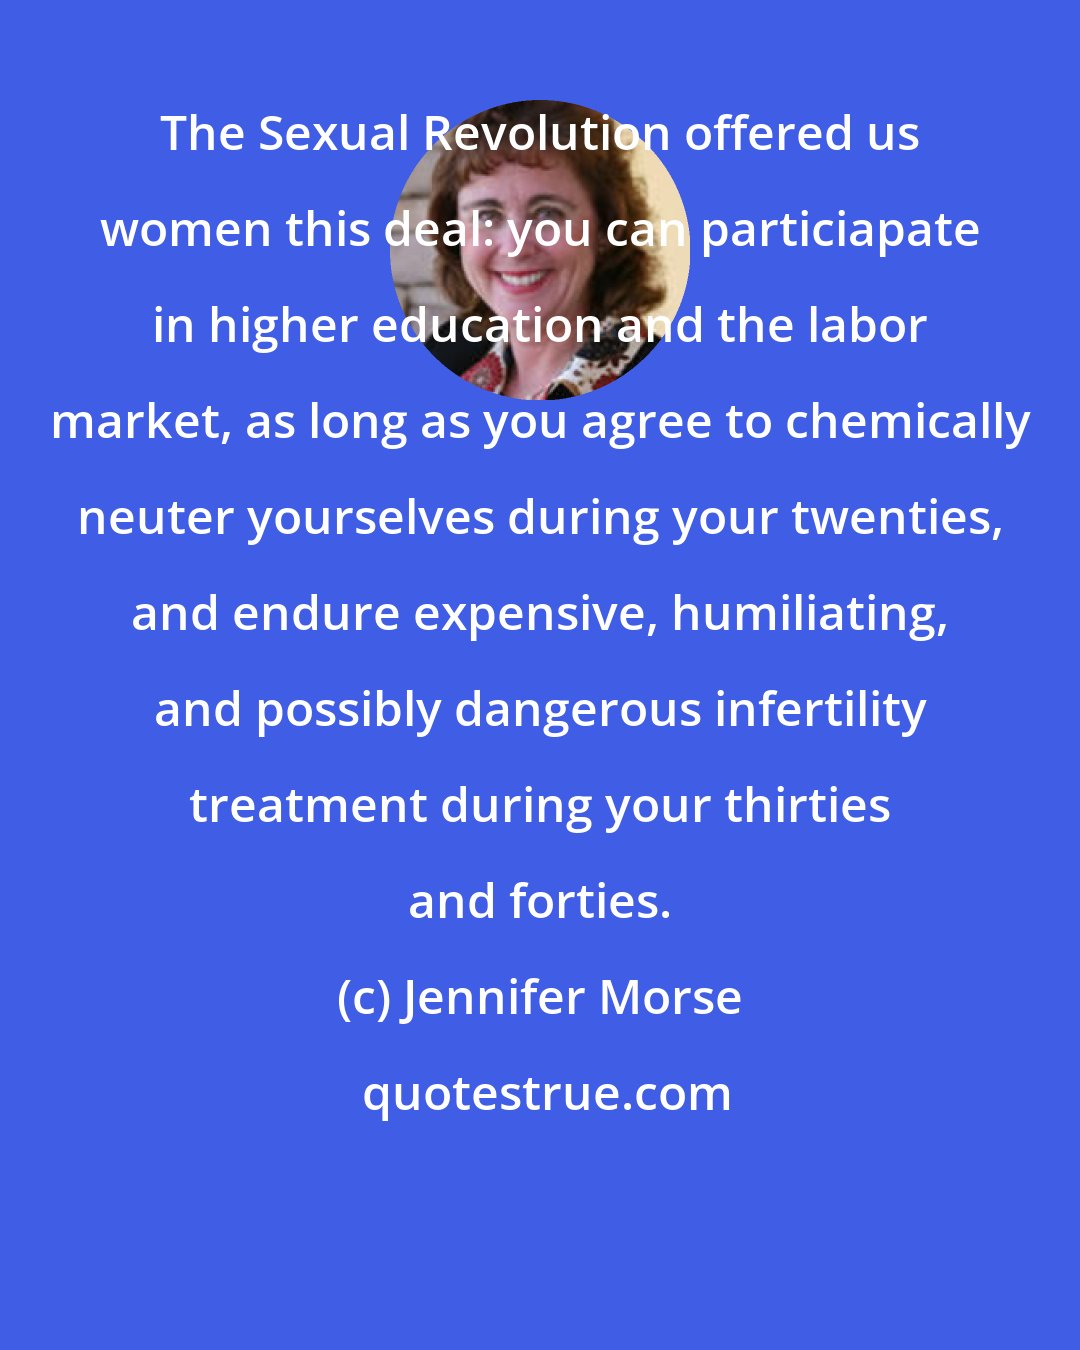 Jennifer Morse: The Sexual Revolution offered us women this deal: you can particiapate in higher education and the labor market, as long as you agree to chemically neuter yourselves during your twenties, and endure expensive, humiliating, and possibly dangerous infertility treatment during your thirties and forties.